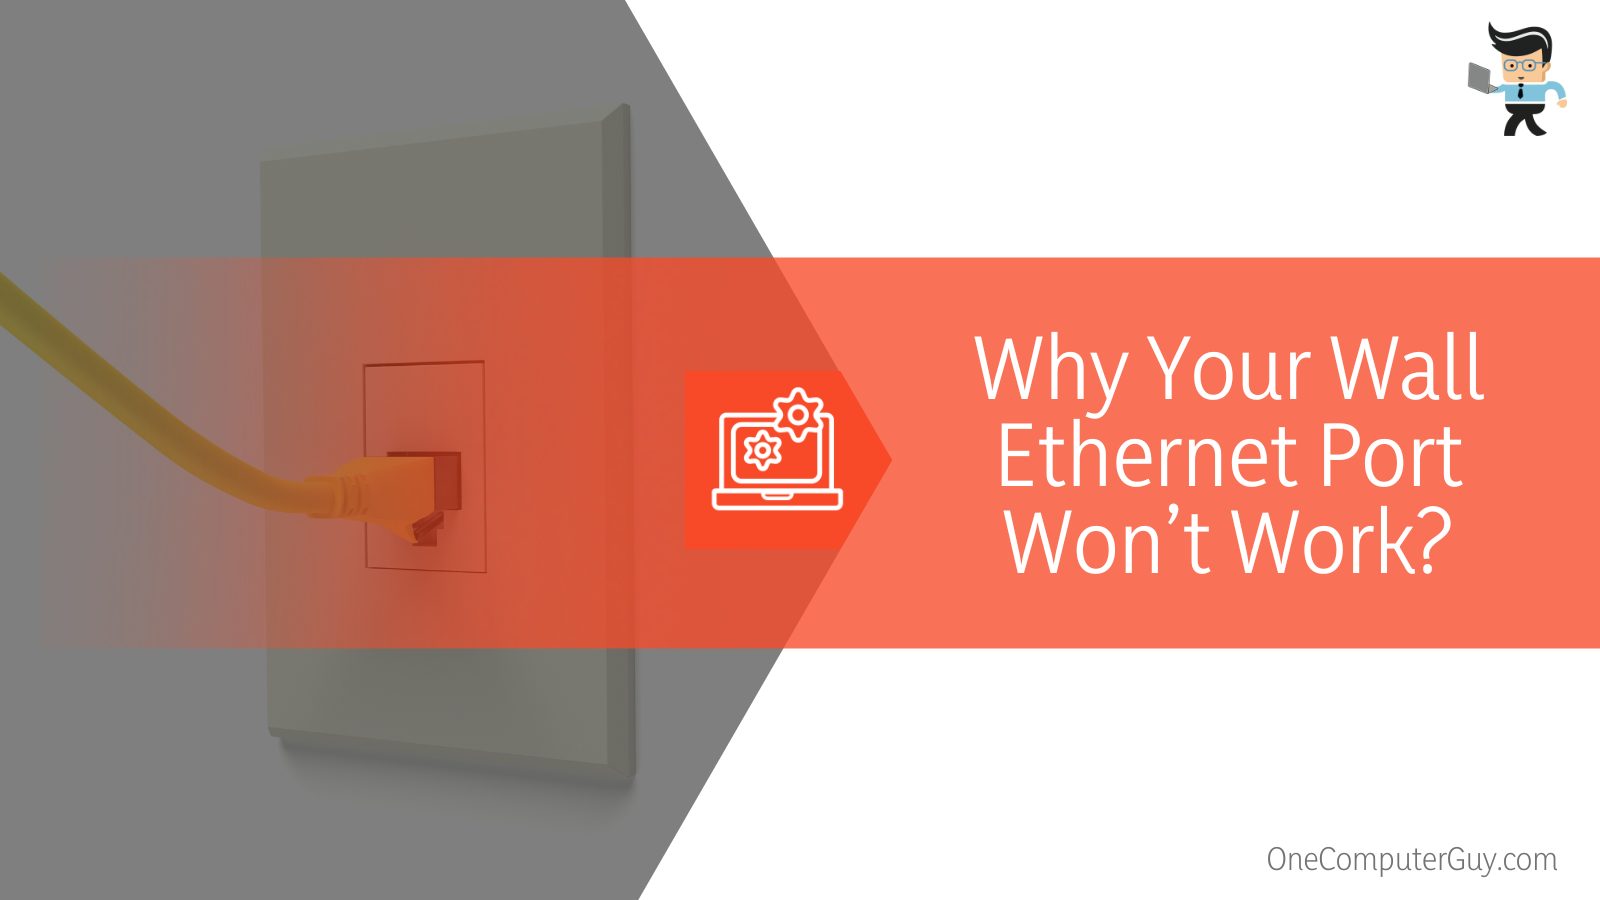 Why Your Wall Ethernet Port Won’t Work